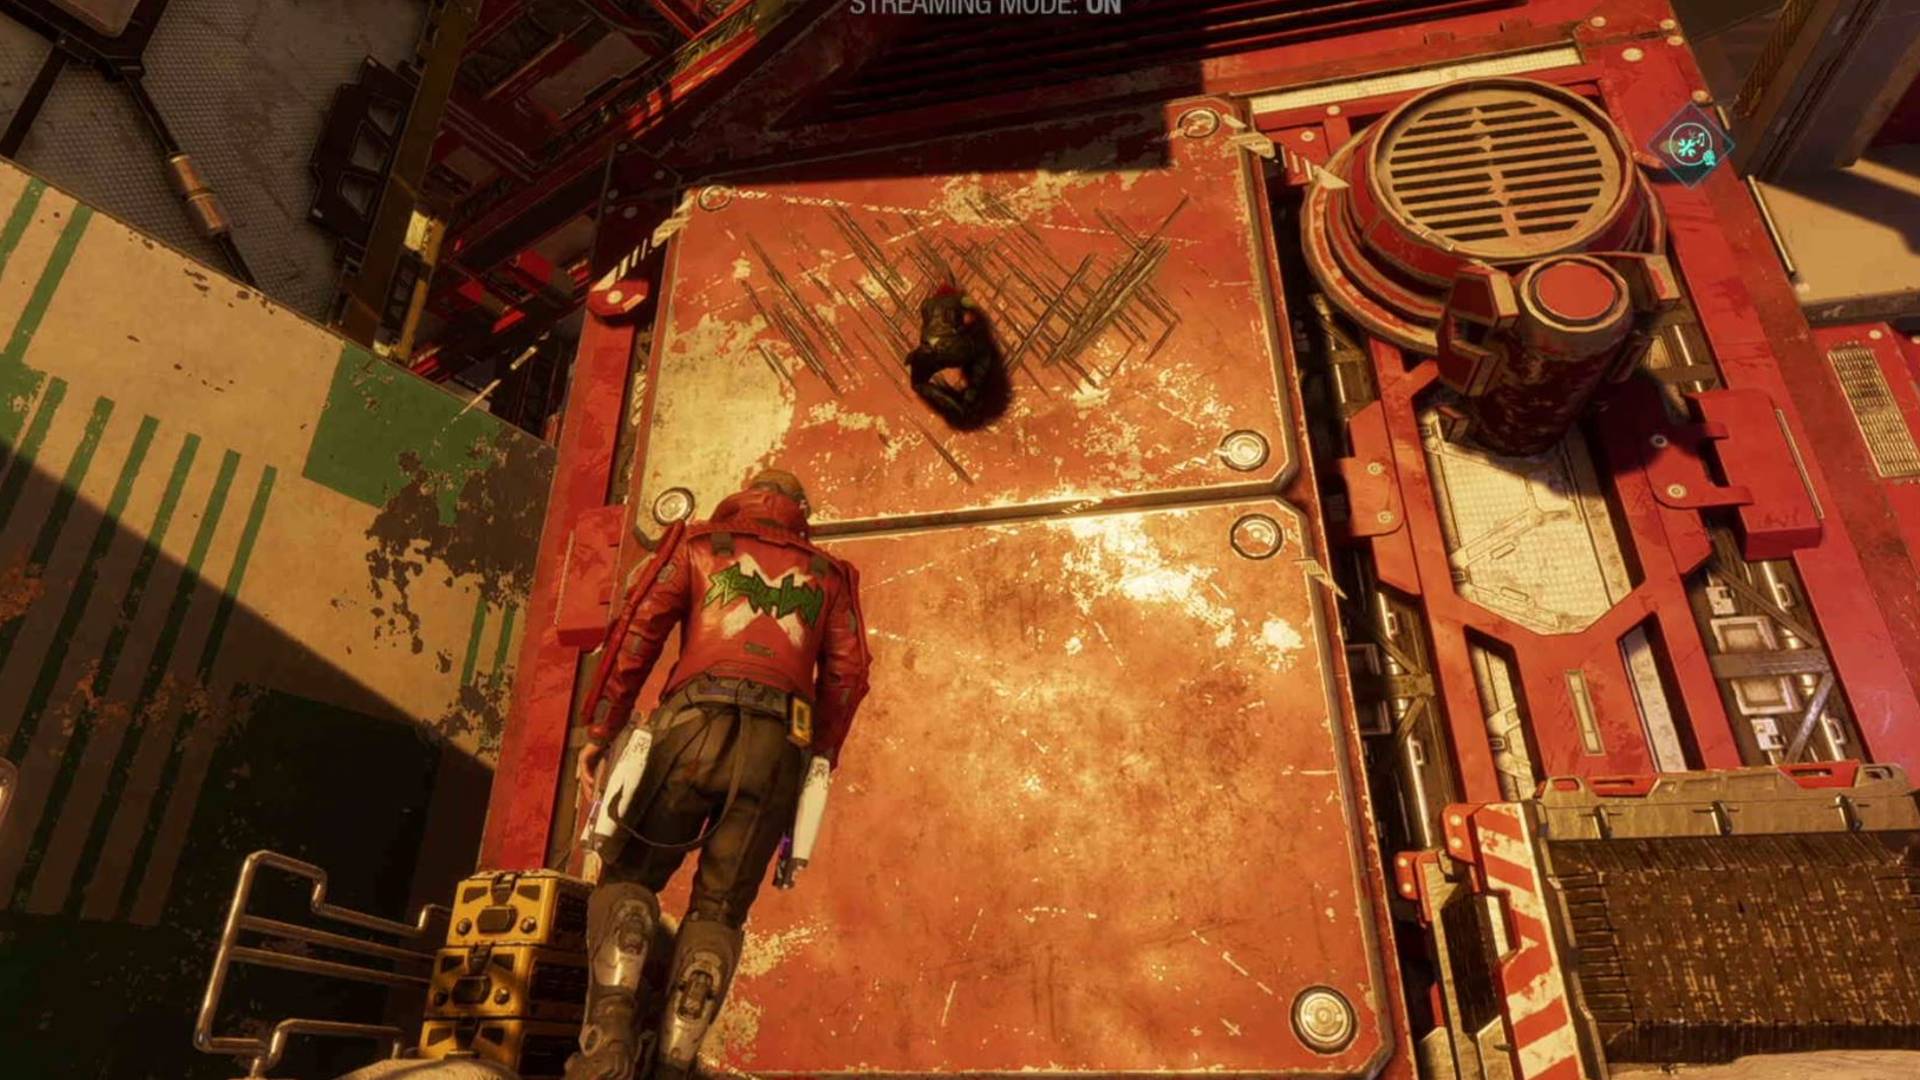 Guardians of the Galaxy outfit locations: Star-Lord is looking at the wall Gamora is clinging onto. 